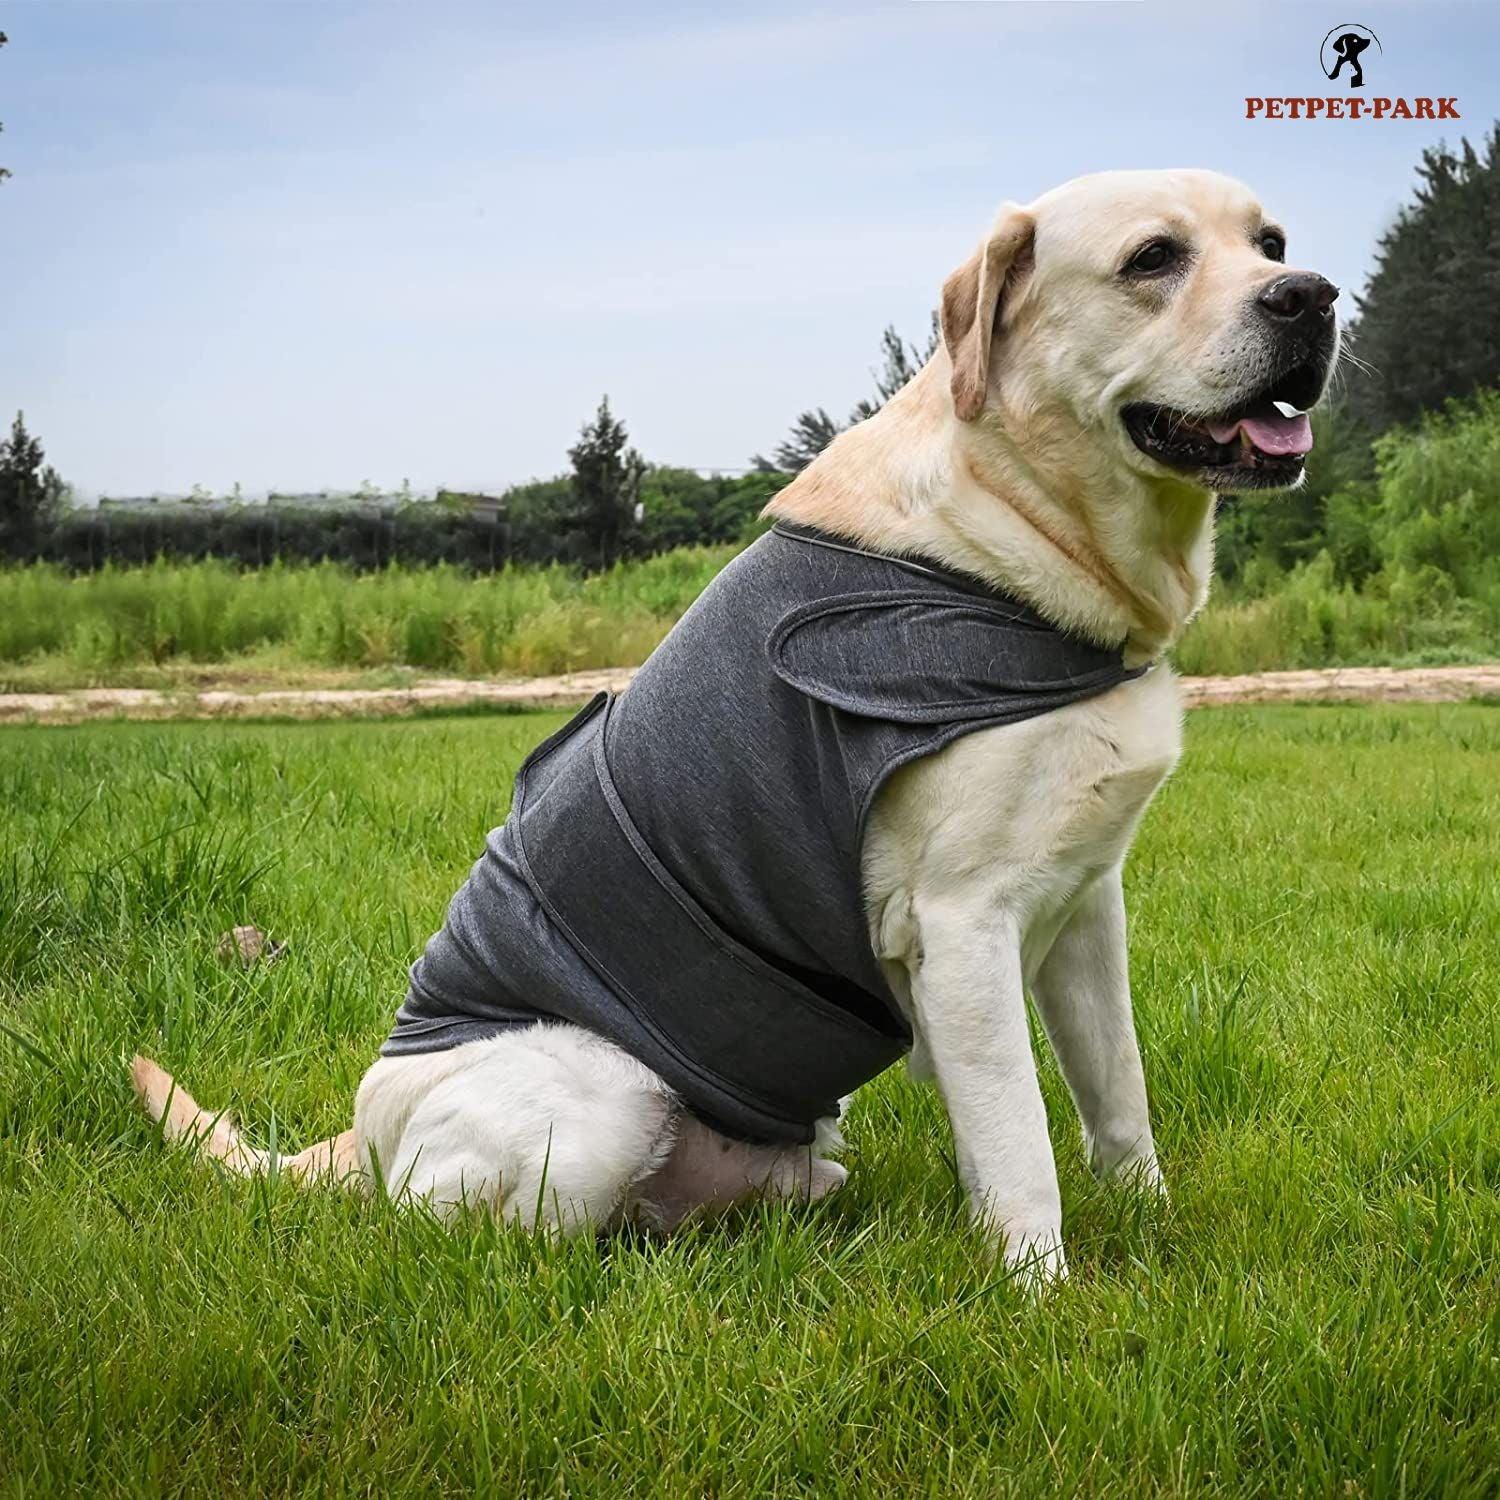 Dog Anti-Anxiety Jacket | Pet Calm Vest |Skin-Friendly Material, Stress relief - Petpet-Park